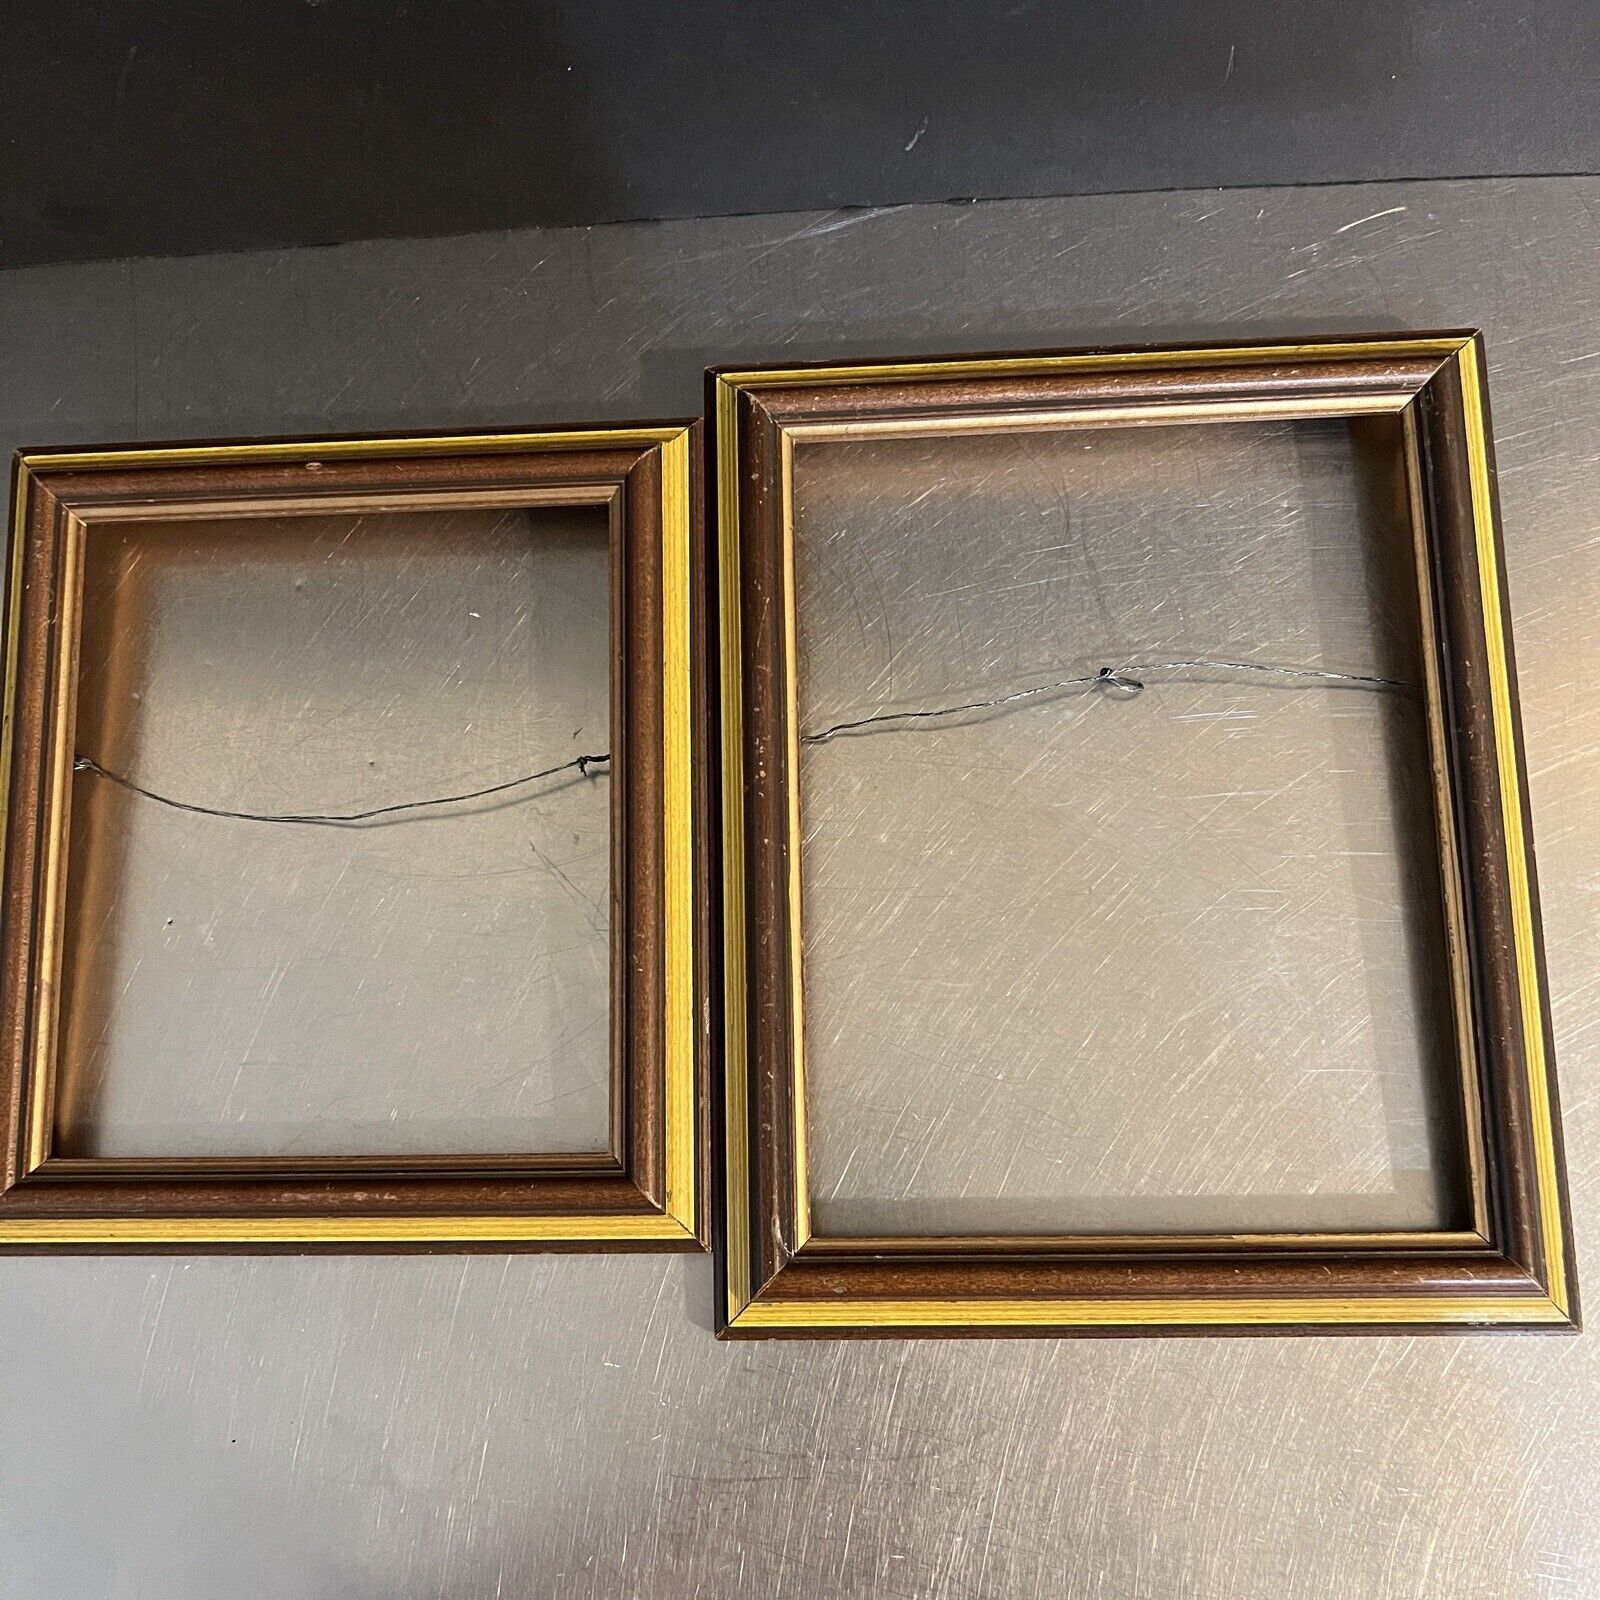 VTG Wooden Picture Frames Set 2 Matching Different Sizes No Glass Gold Brown